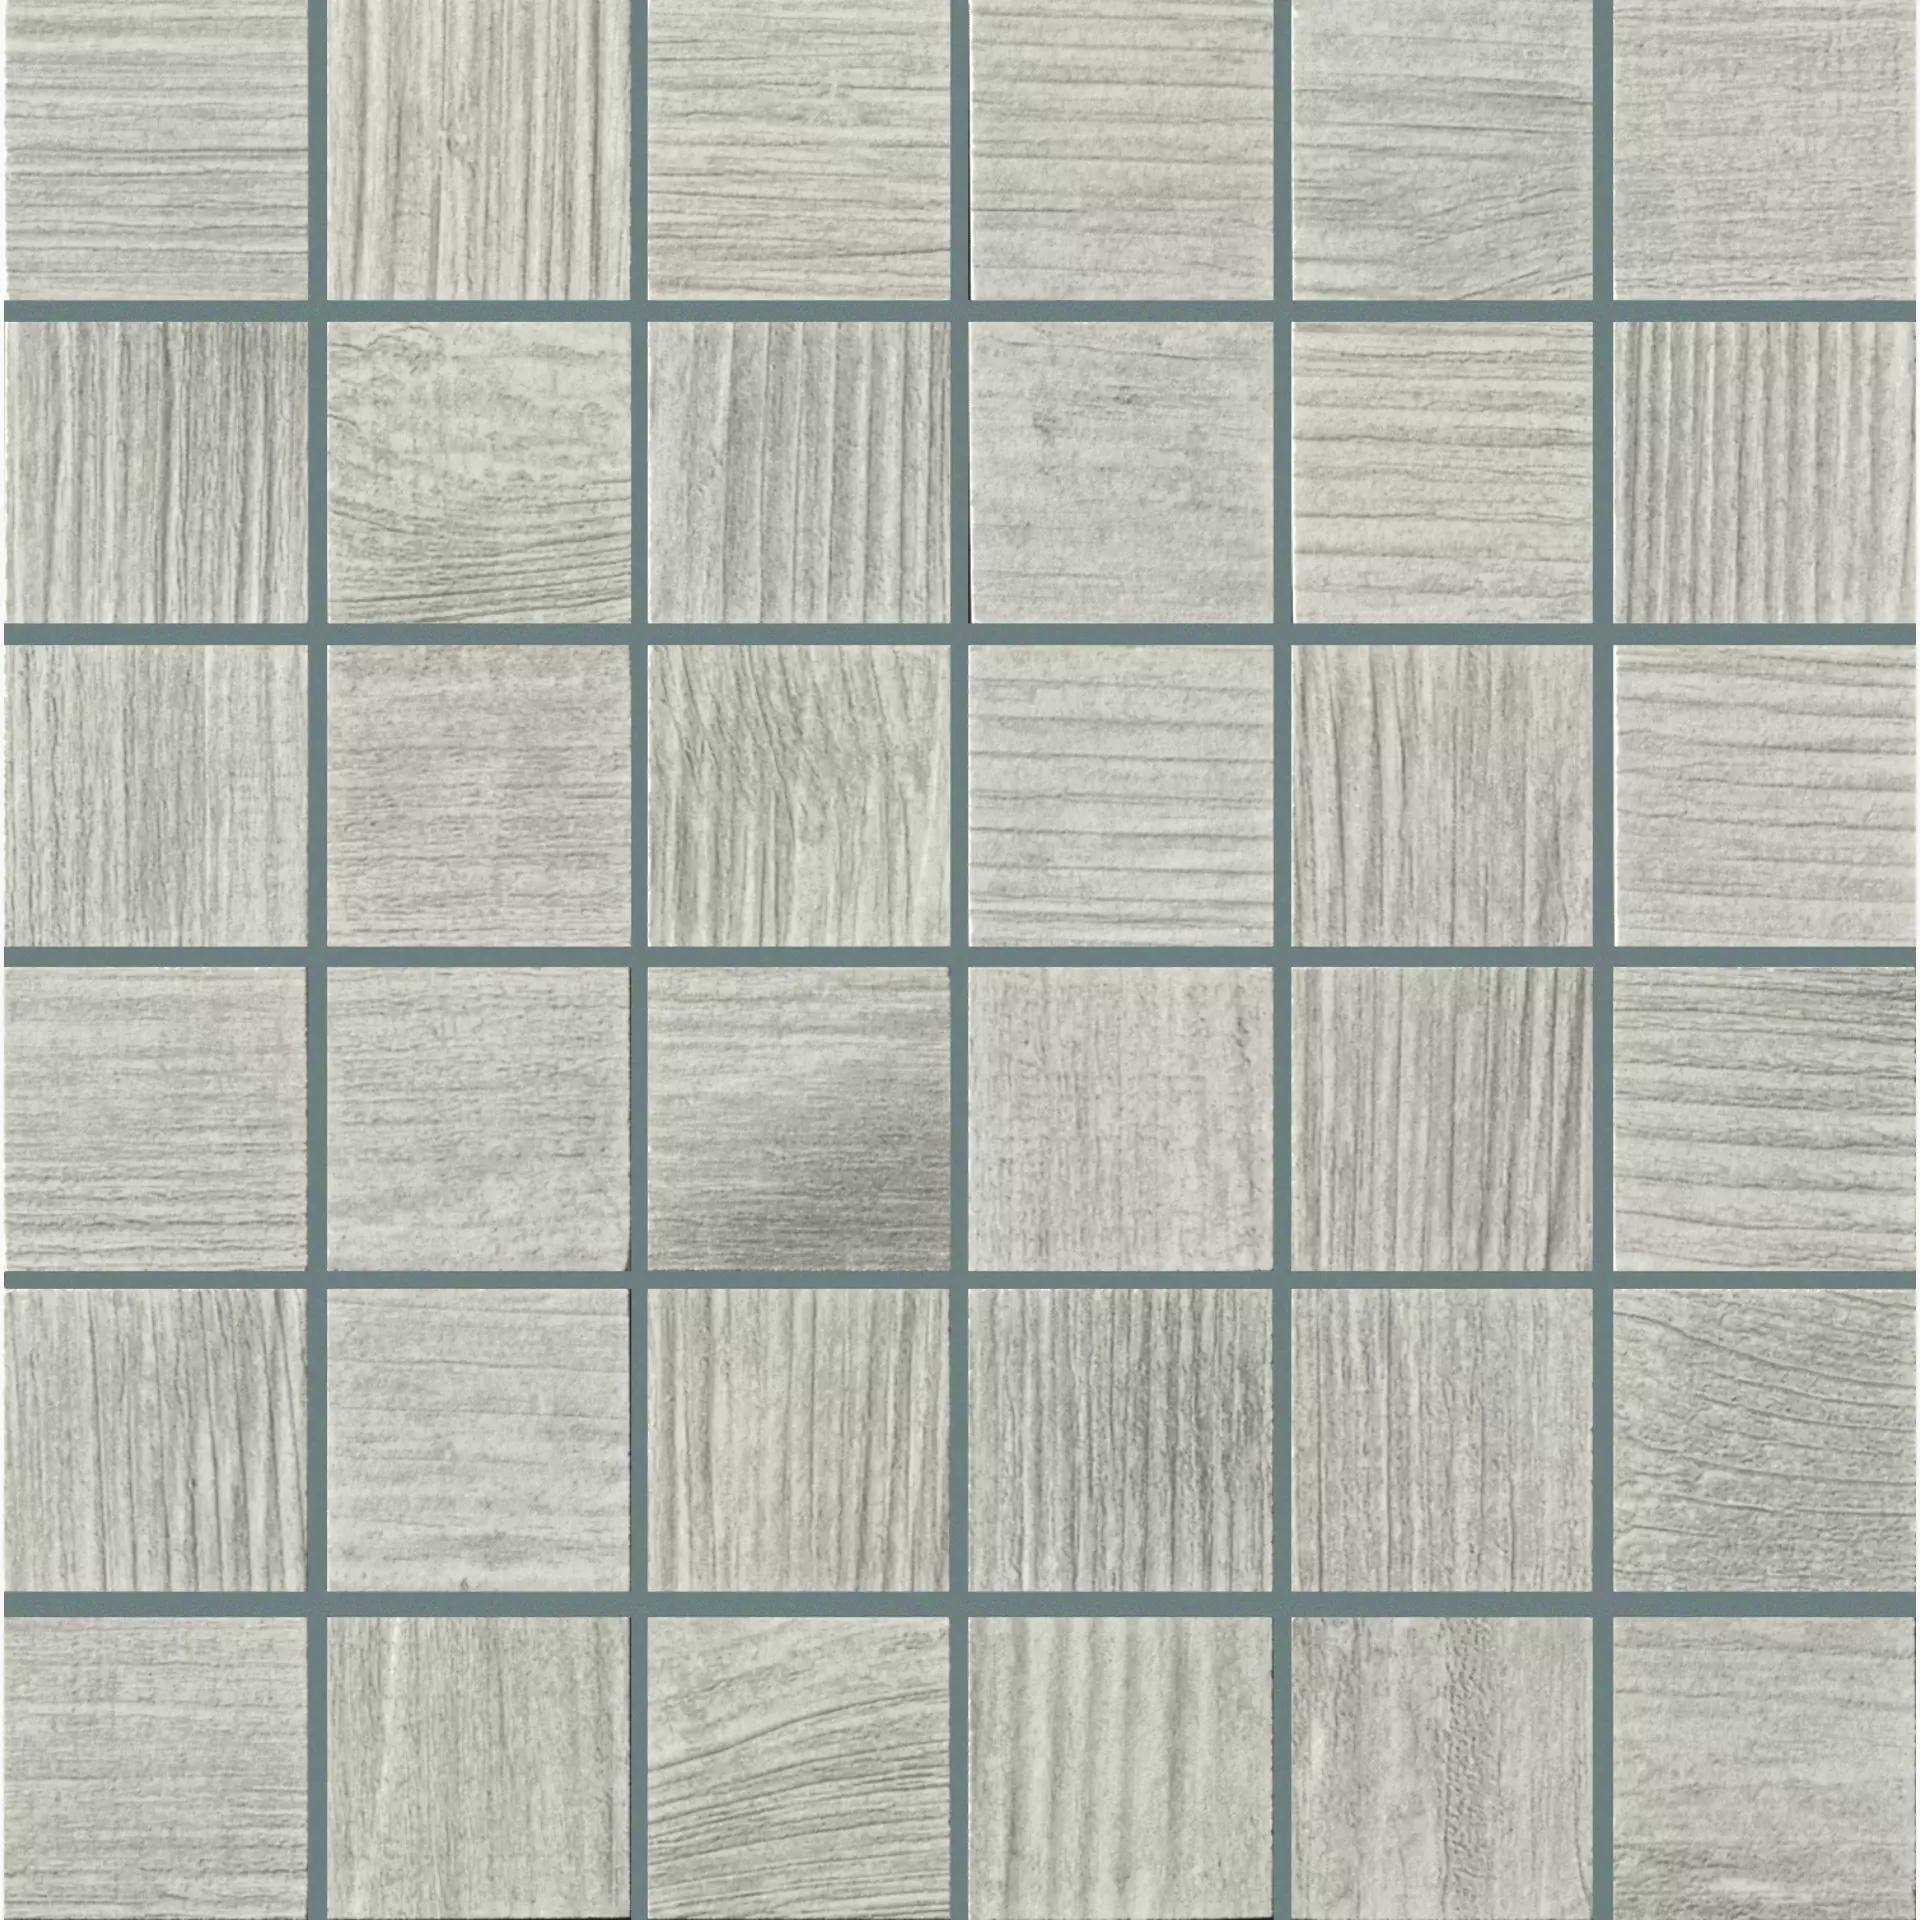 Serenissima Norway Natural Feel Naturale Mosaic 5x5 1050917 30x30cm rectified